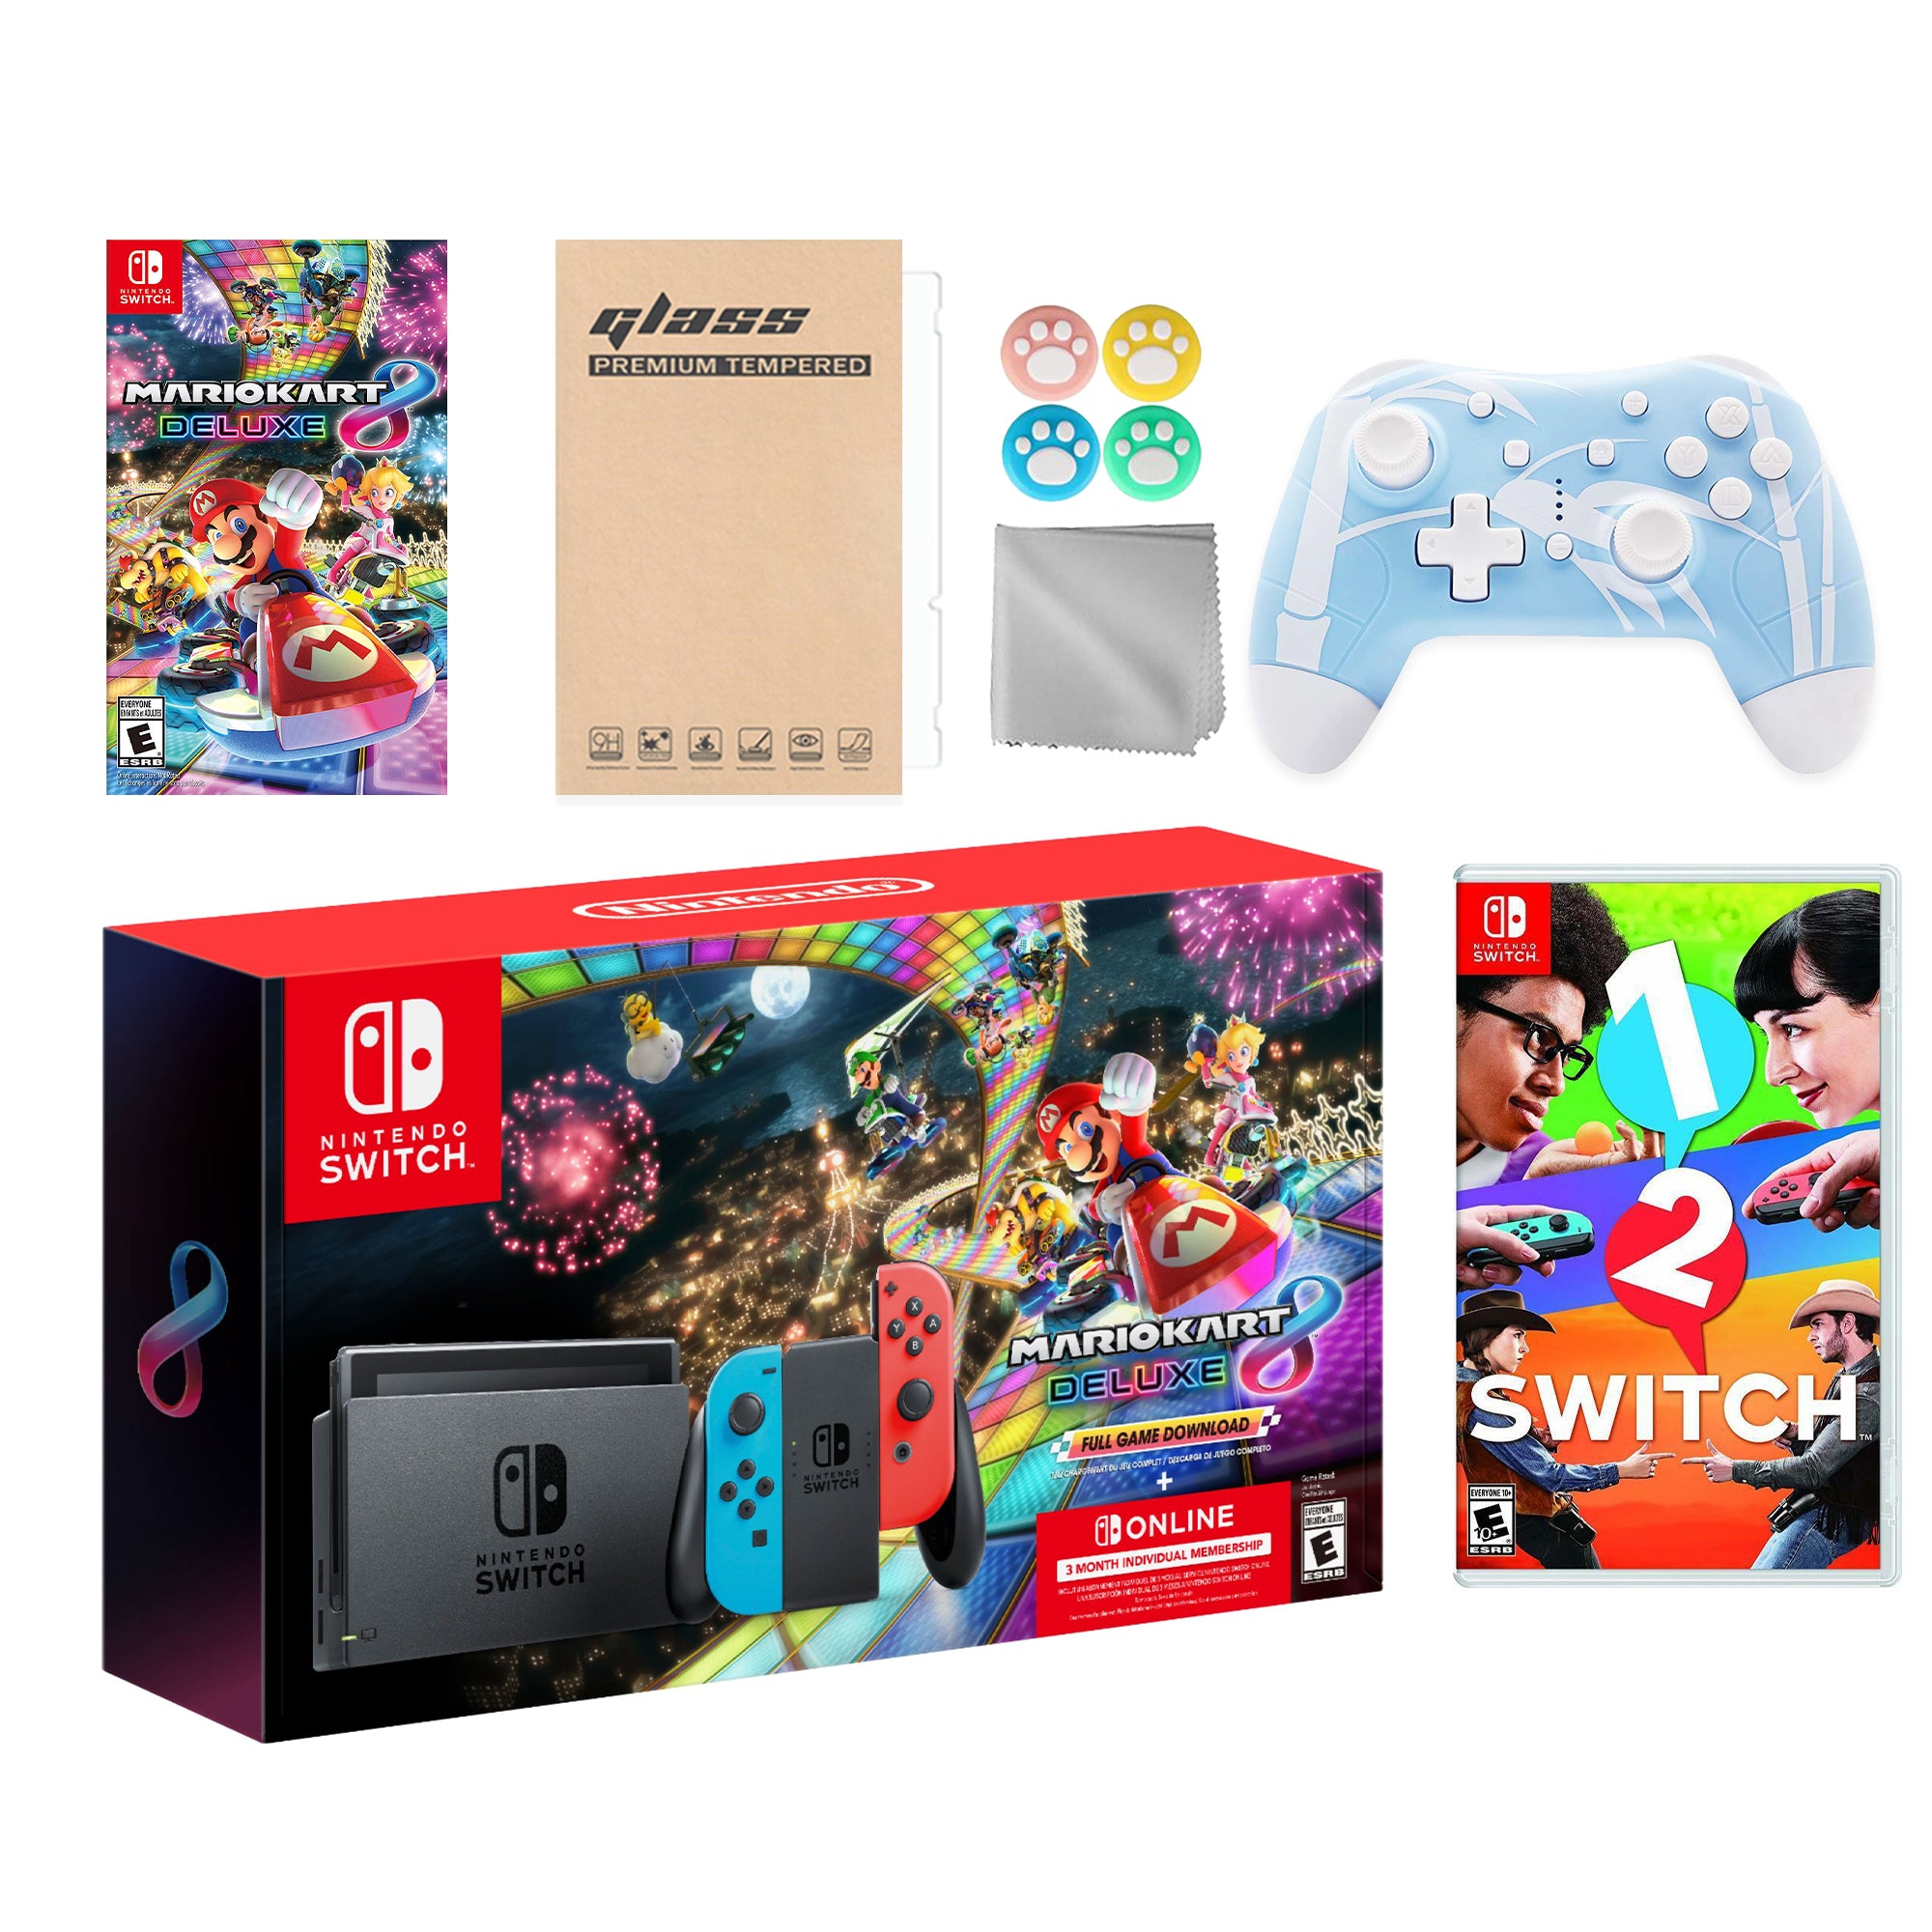 Nintendo Switch Mario Kart 8 Deluxe Bundle: Red Blue Console, Mario Kart 8 & Membership, 1-2 Switch, Mytrix Wireless Pro Controller Blue Bamboo and Accessories